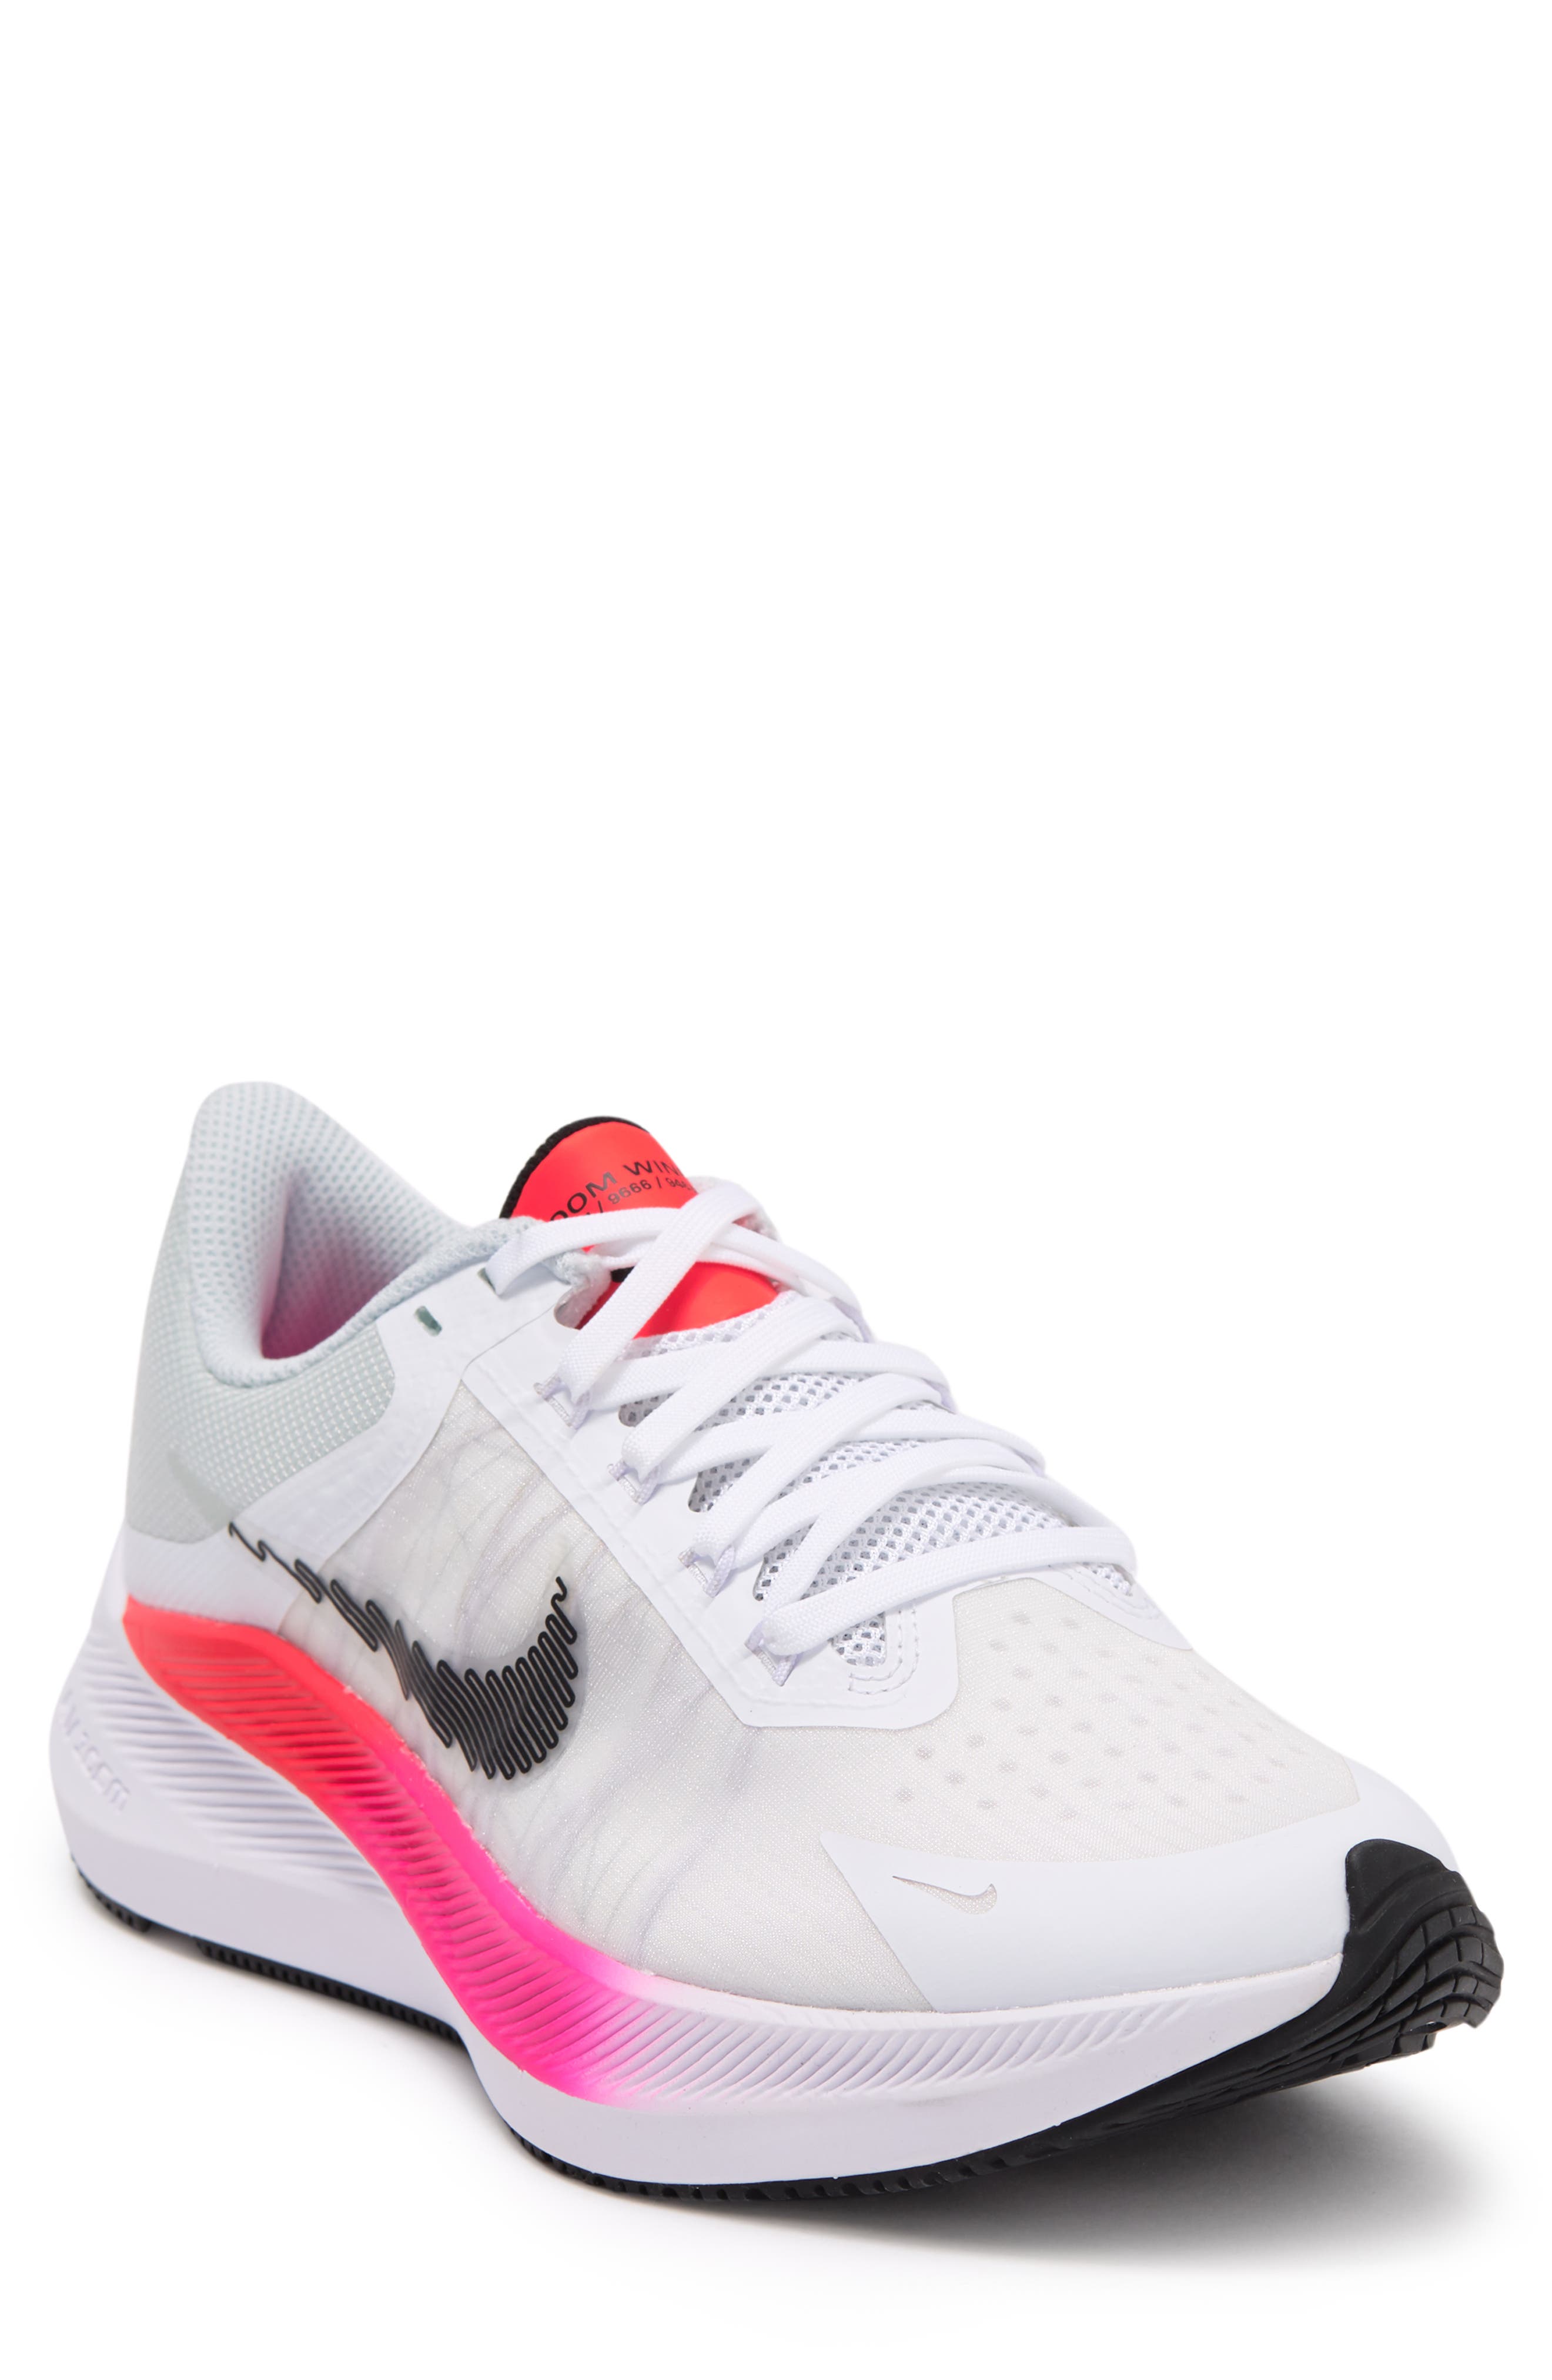 NIKE Shoes Clearance | Nordstrom Rack